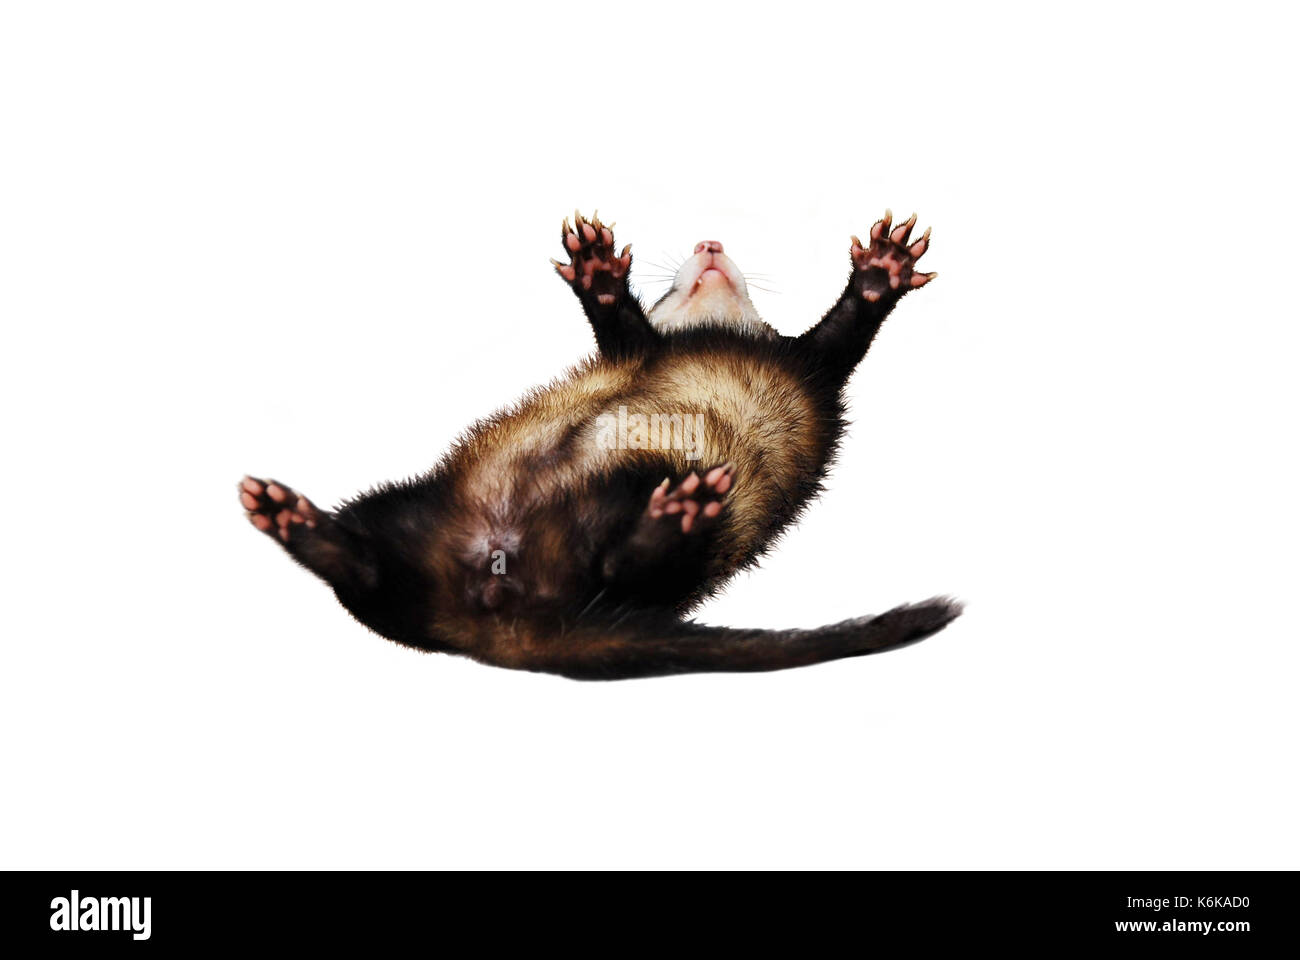 Sable ferret playing/rolling around on an isolated/white background Stock Photo